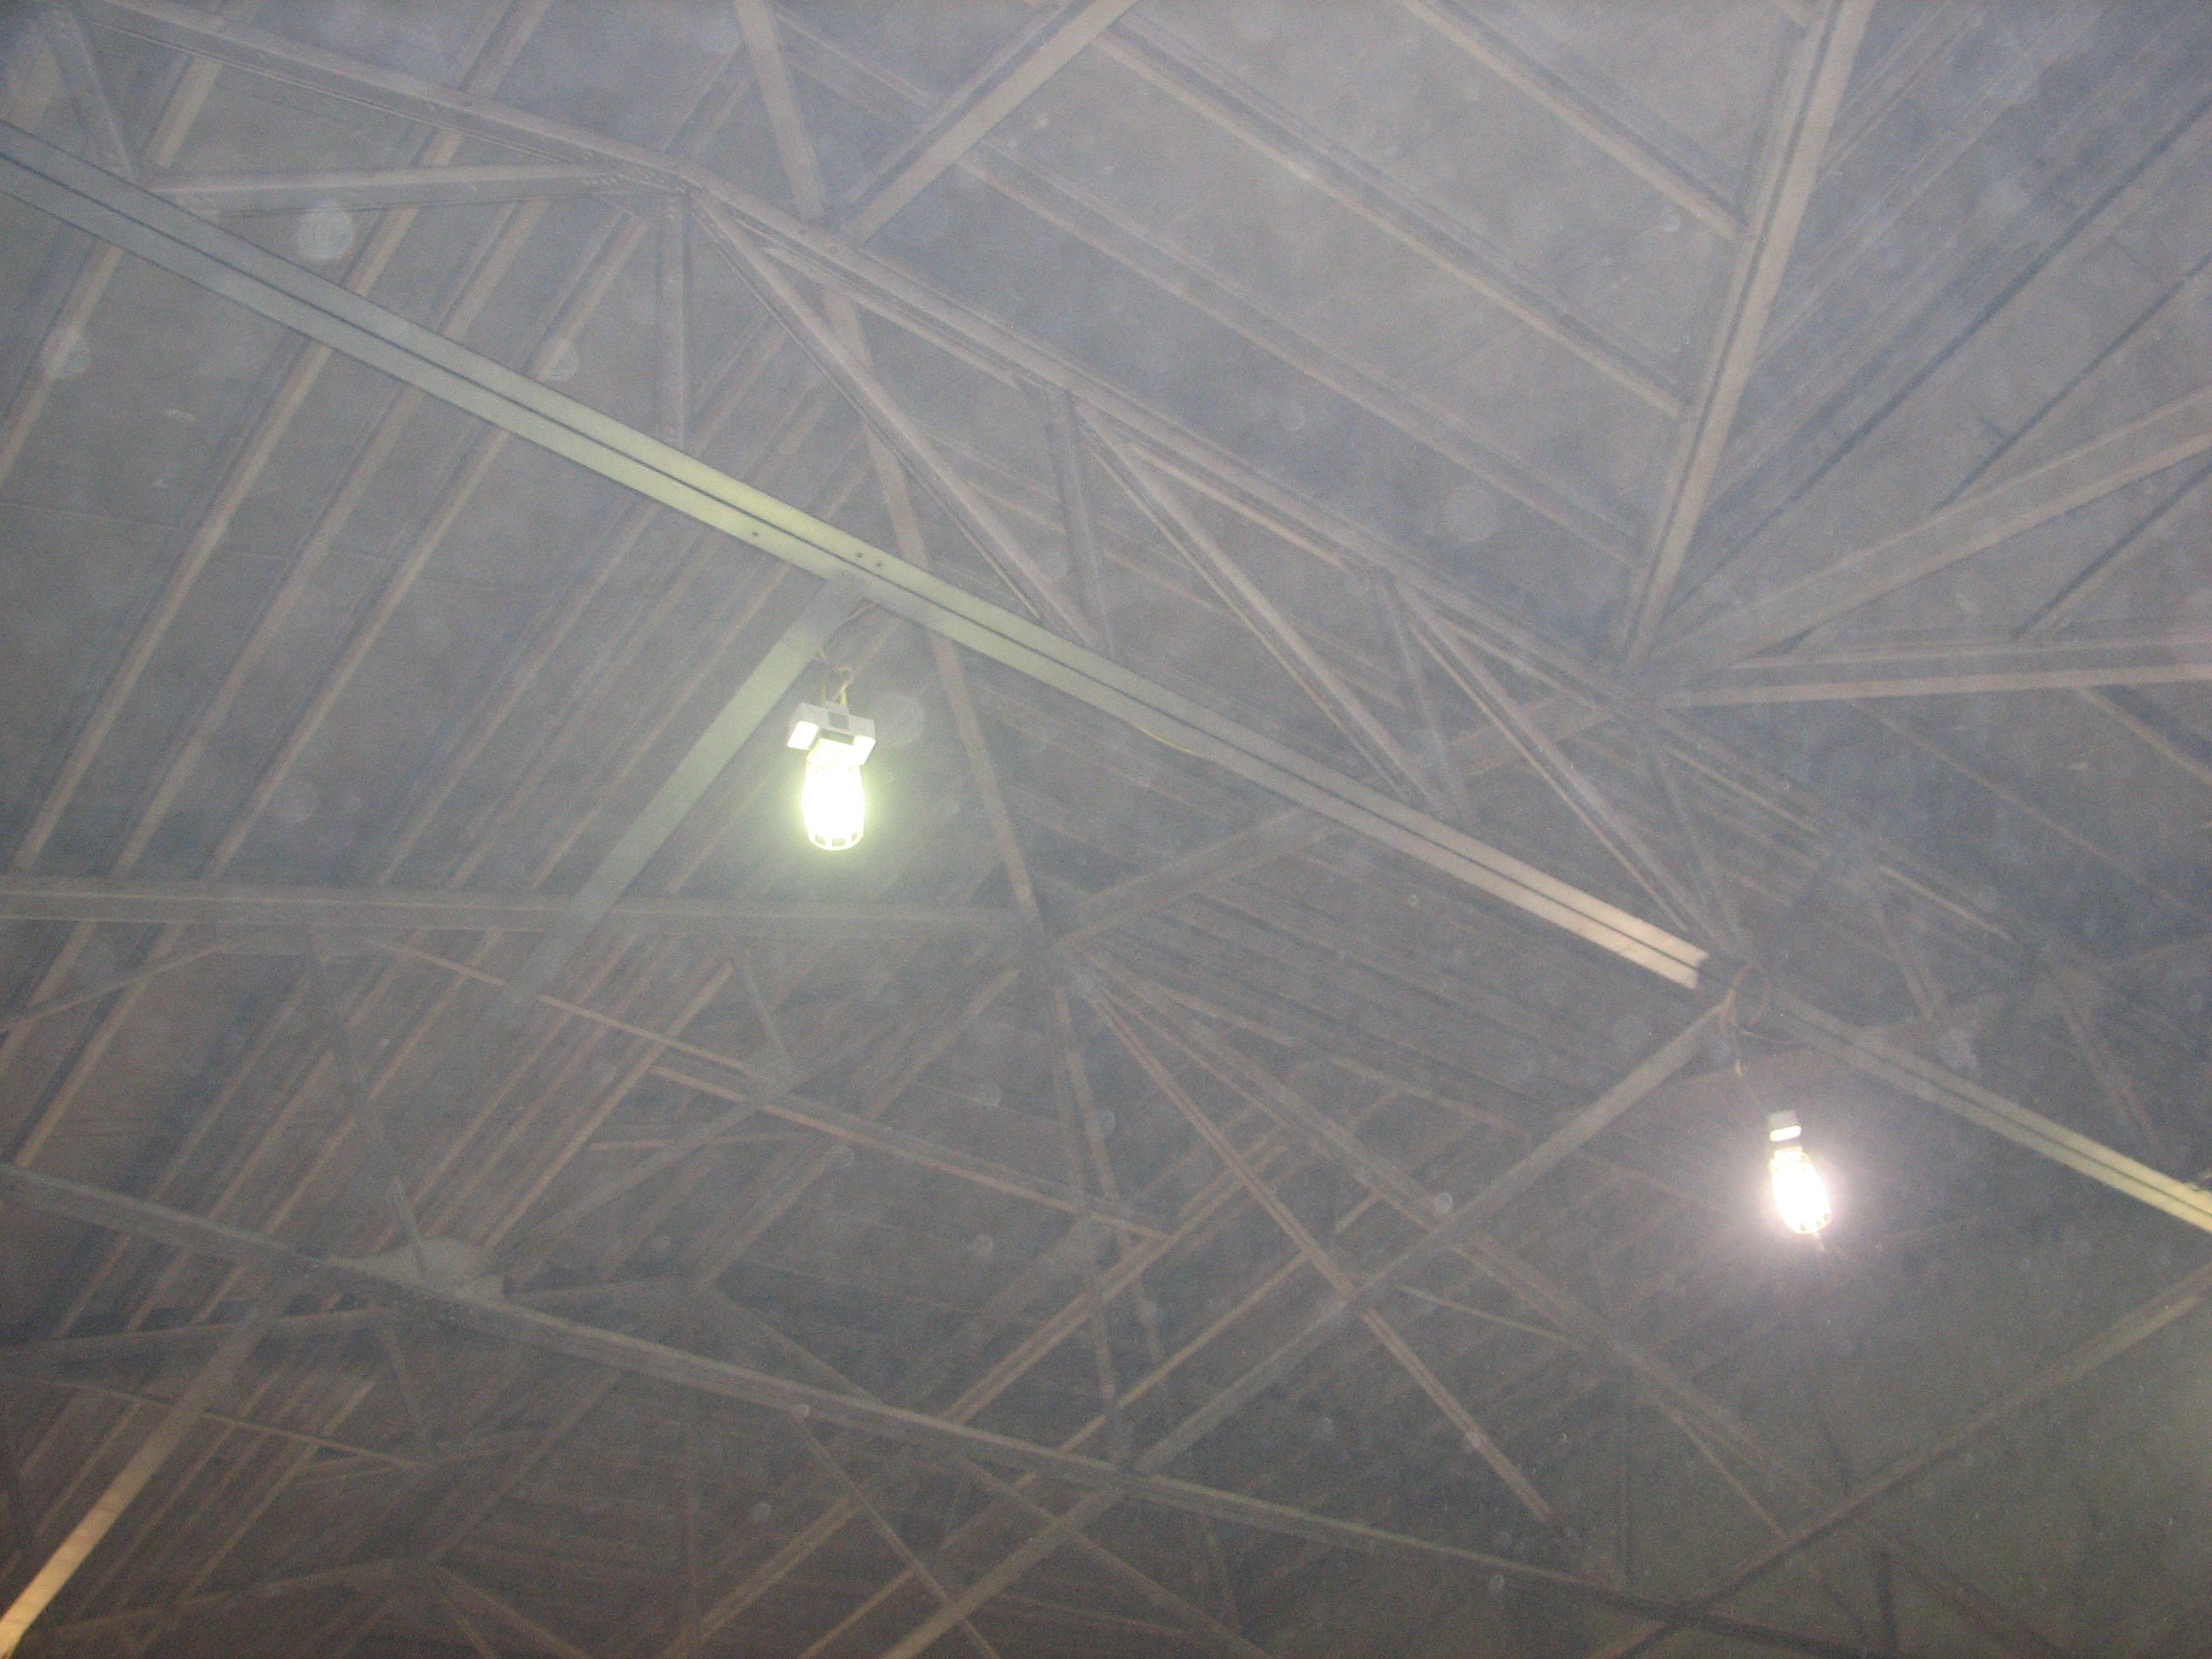 The intricate trusswork of the roof can be seen through a thick layer of construction dust.